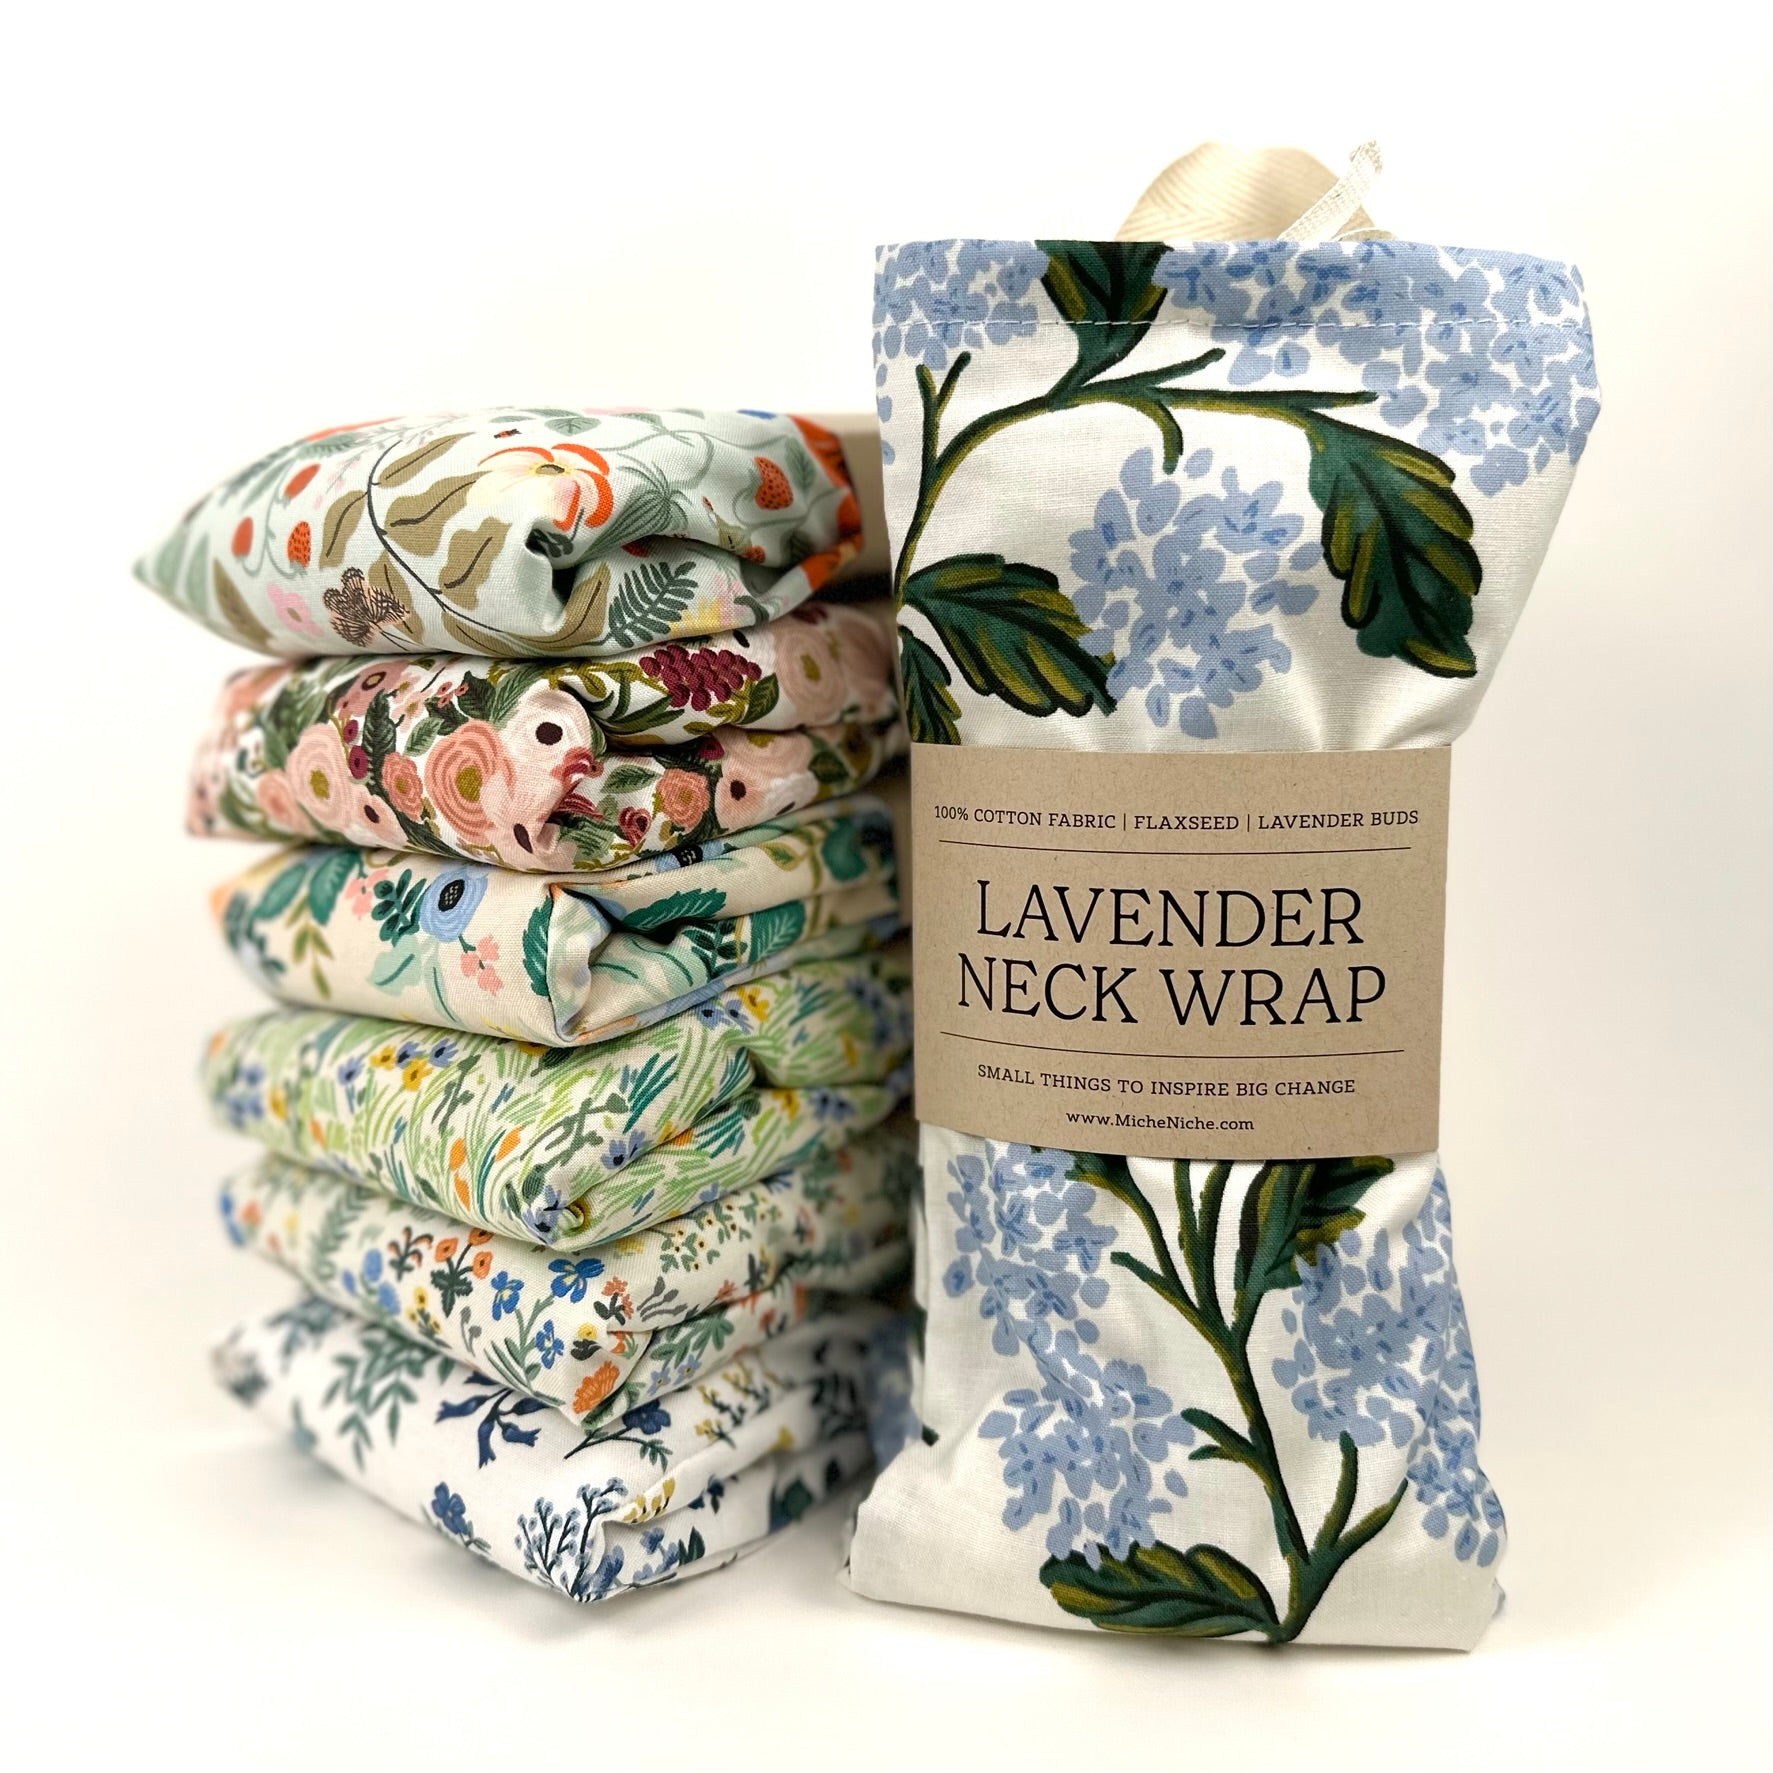 A Collection of Miche Niche Lavender Neck Wraps featuring Rifle Paper Co patterns.